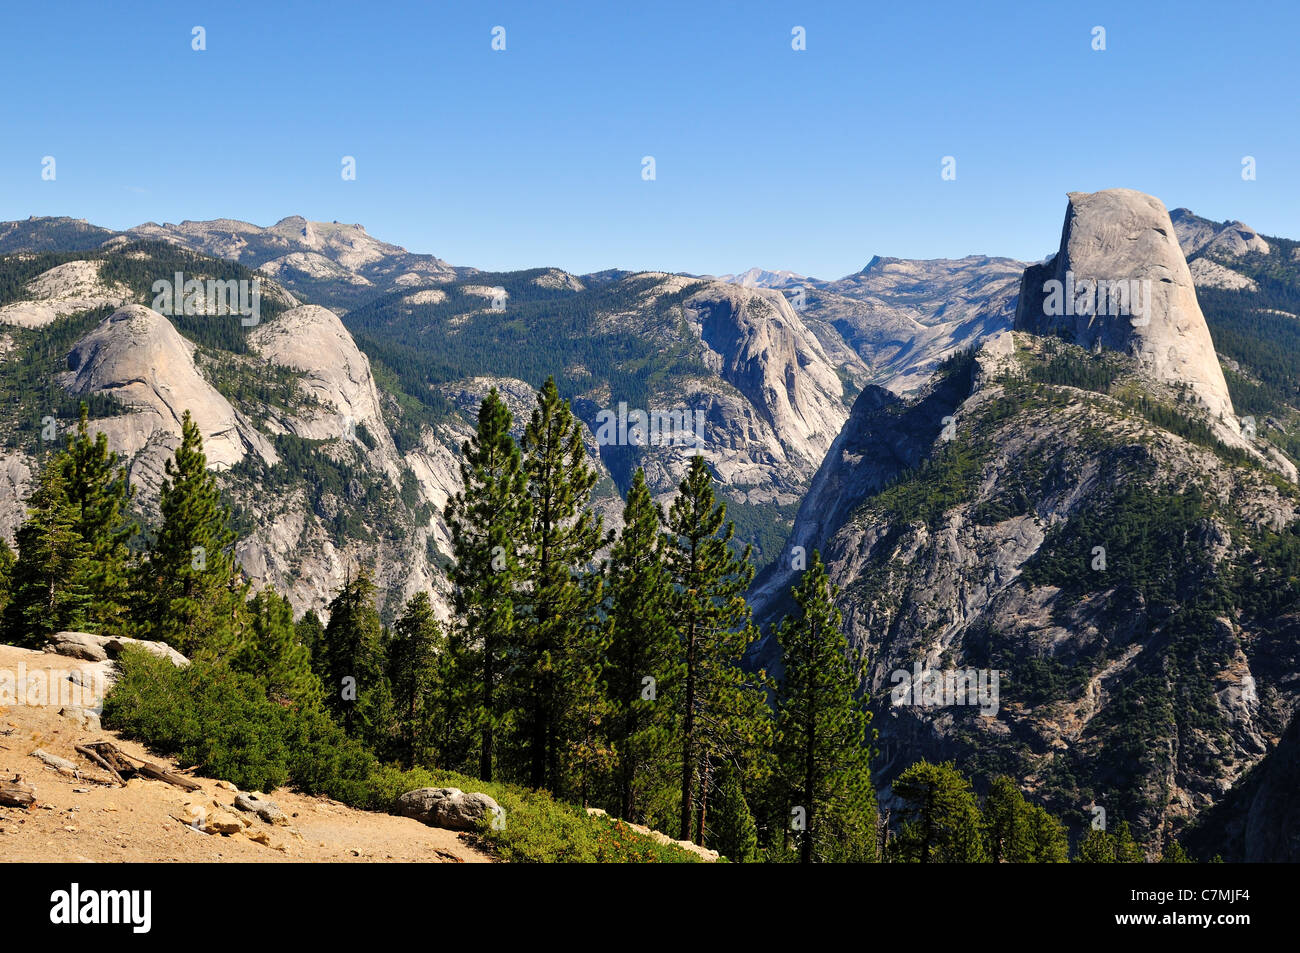 View of the Half Dome and Yosemite Valley from Washburn Point. Yosemite National Park, California, USA. Stock Photo